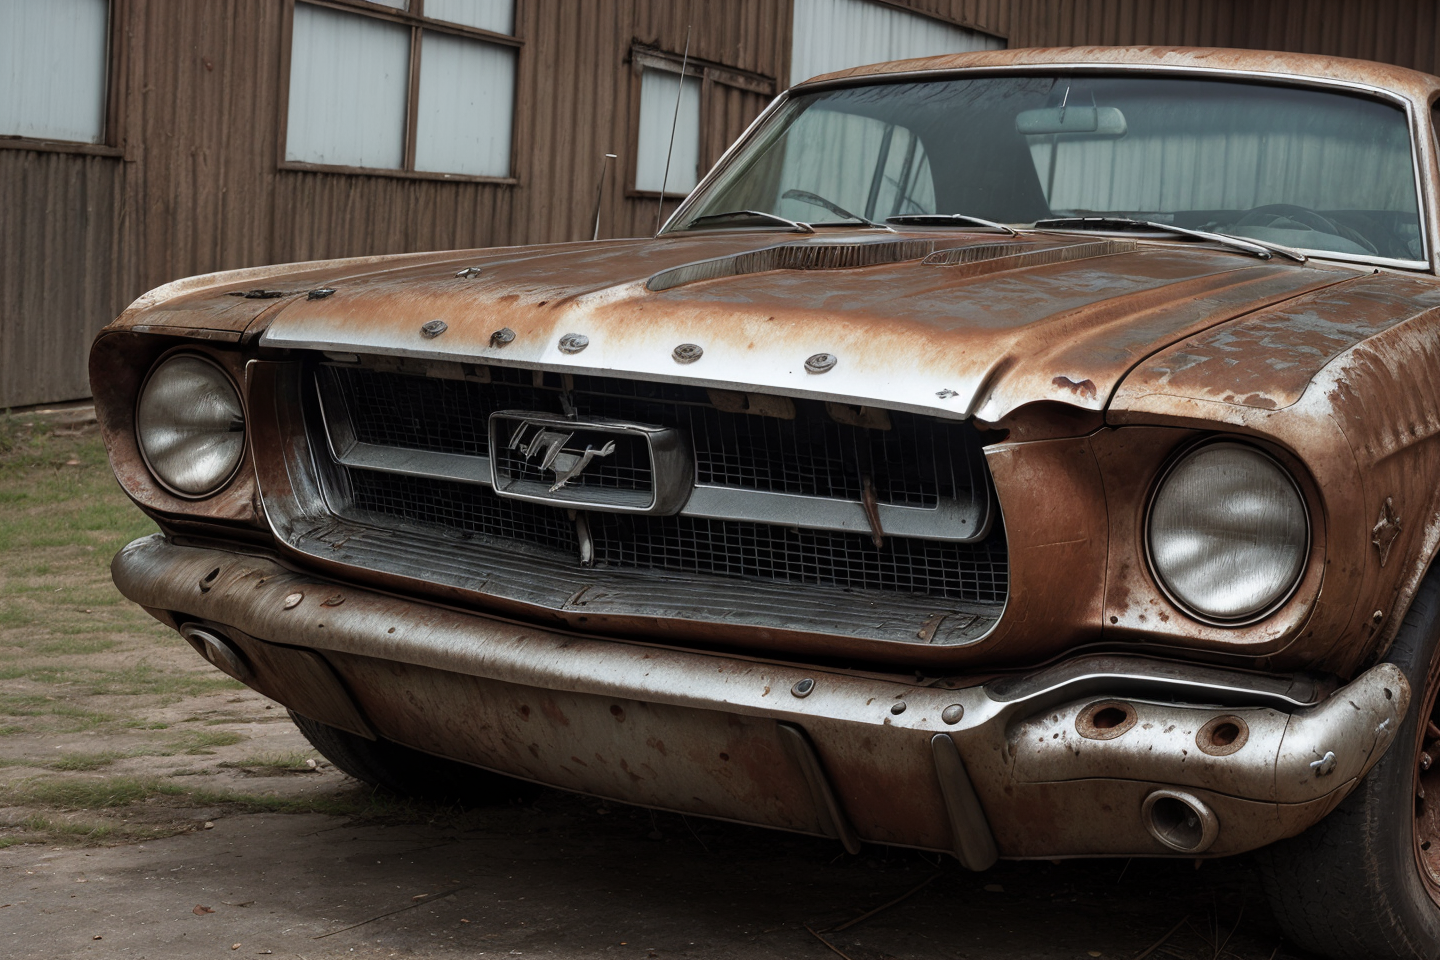 (((rusty, brushed metal, beaten up, weathered, decayed))) 1965 ford mustang